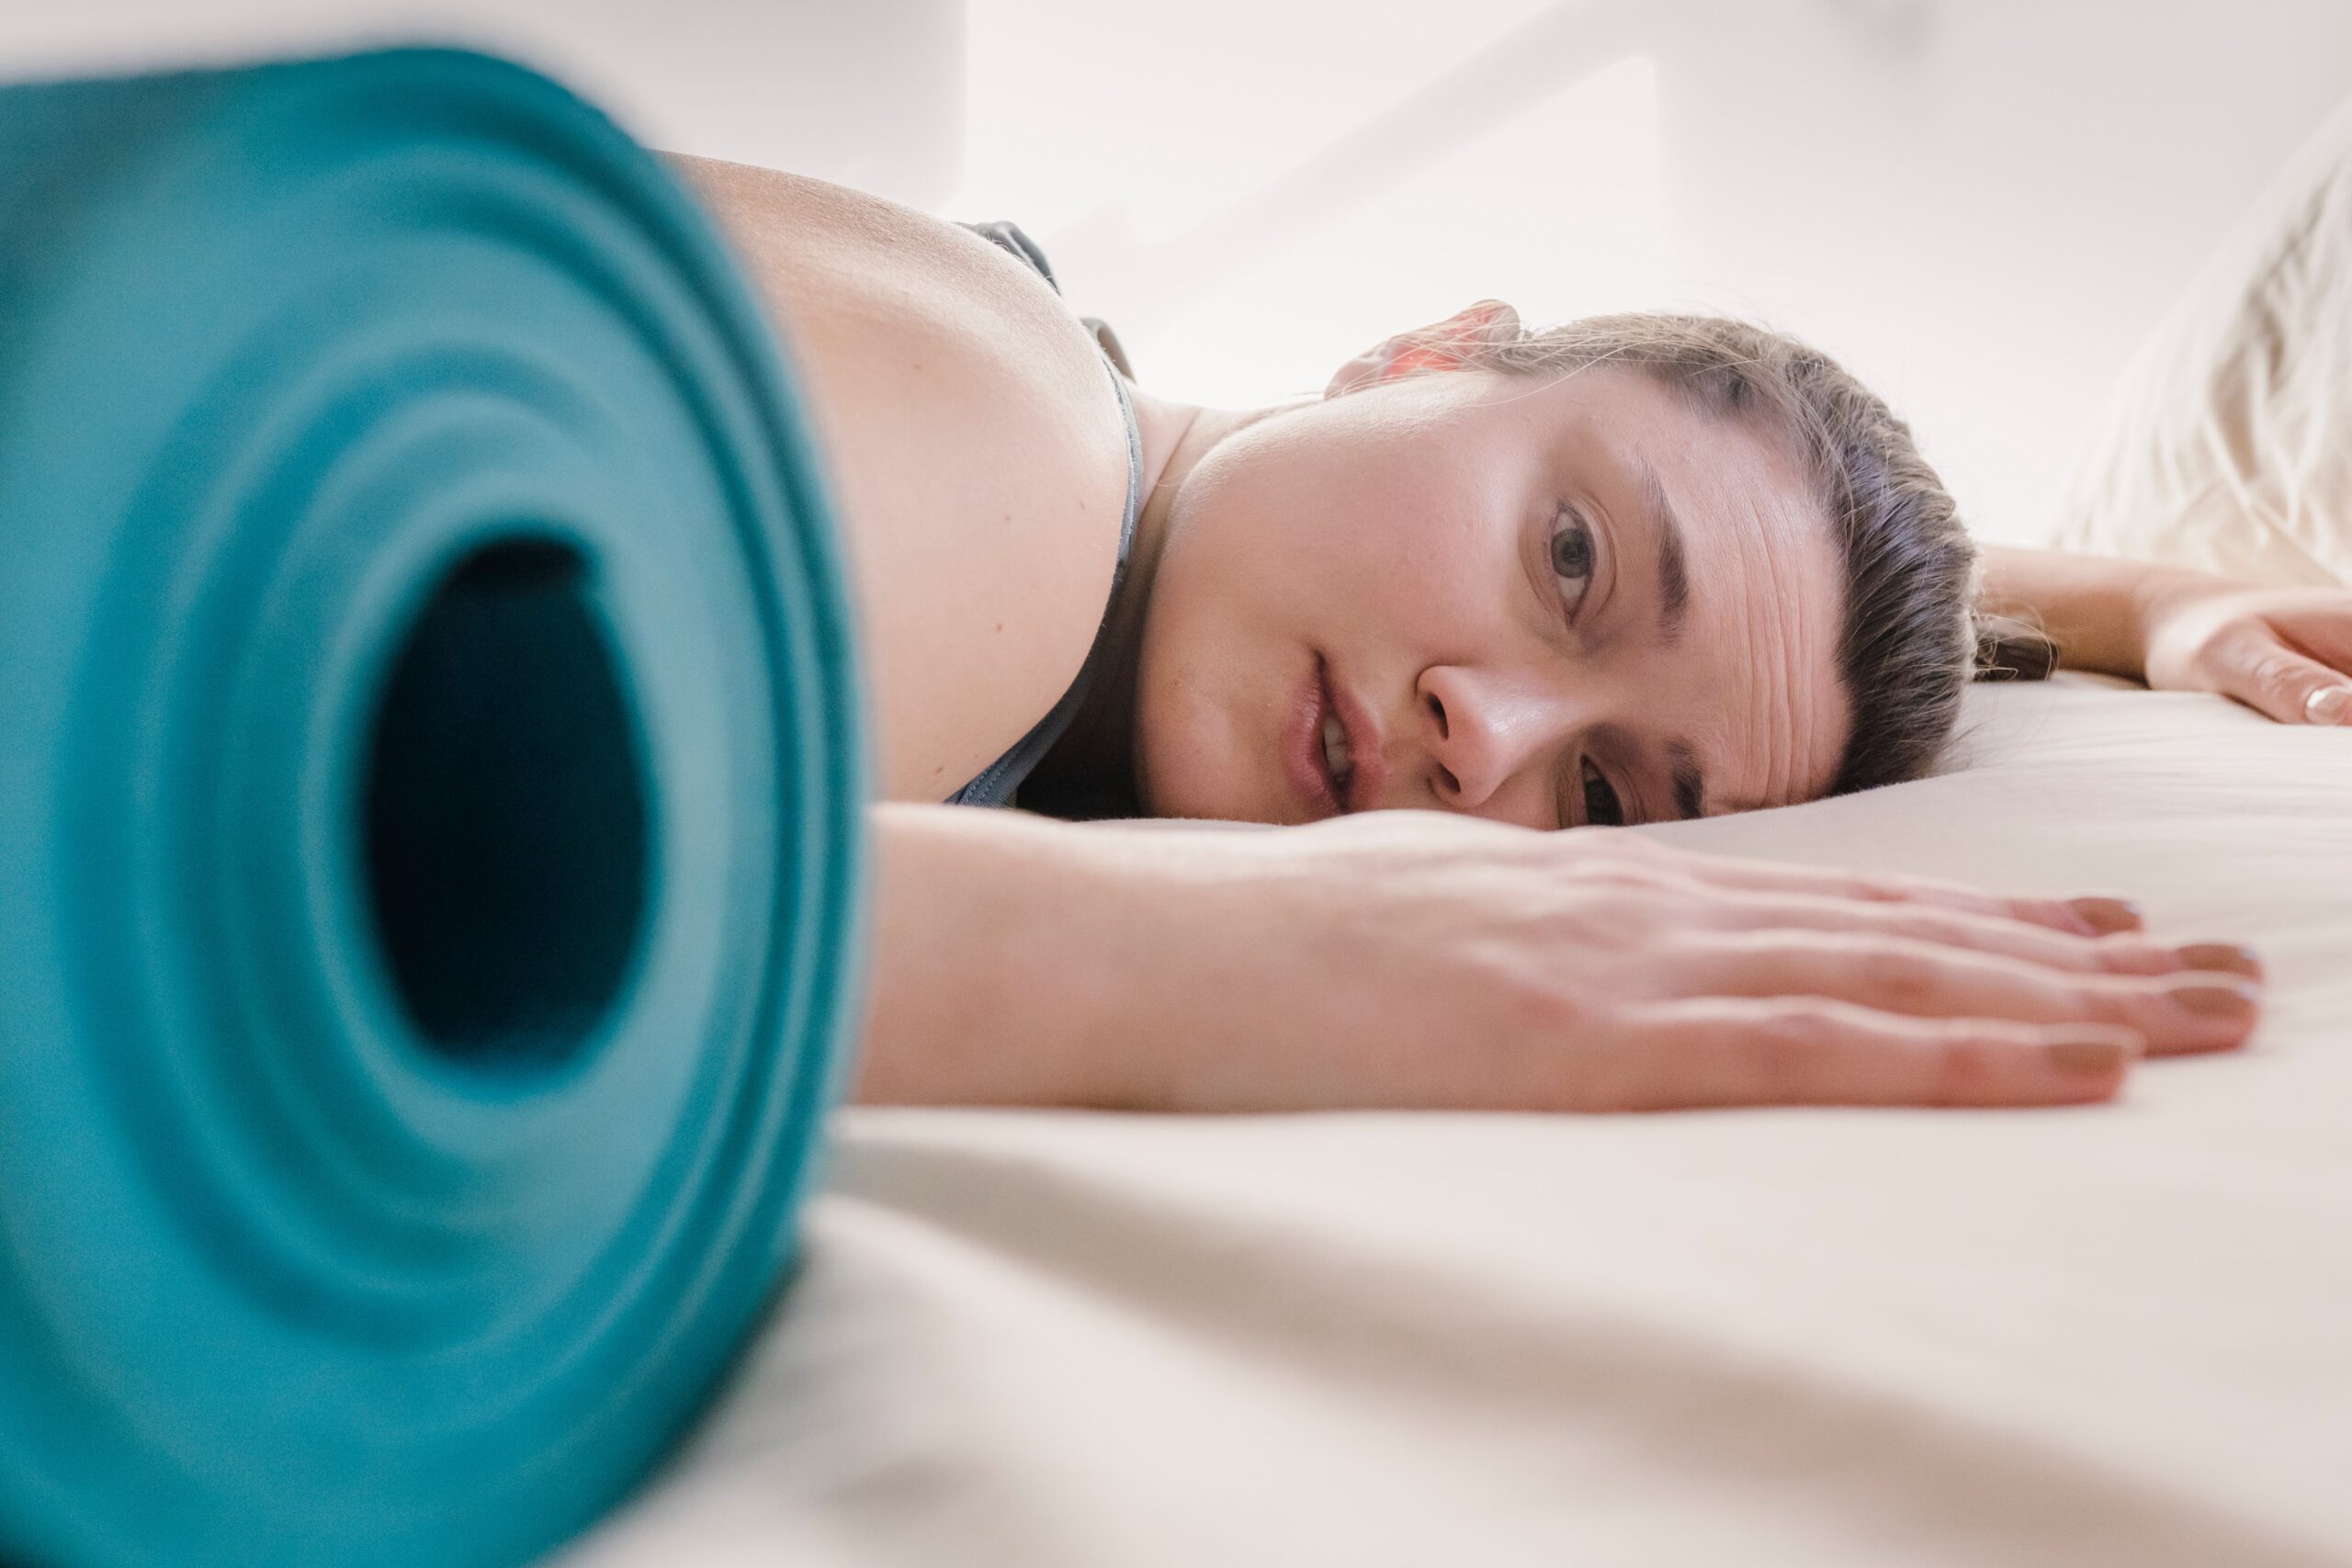 person lying exhausted on bed next to blue rolled-up yoga mat.